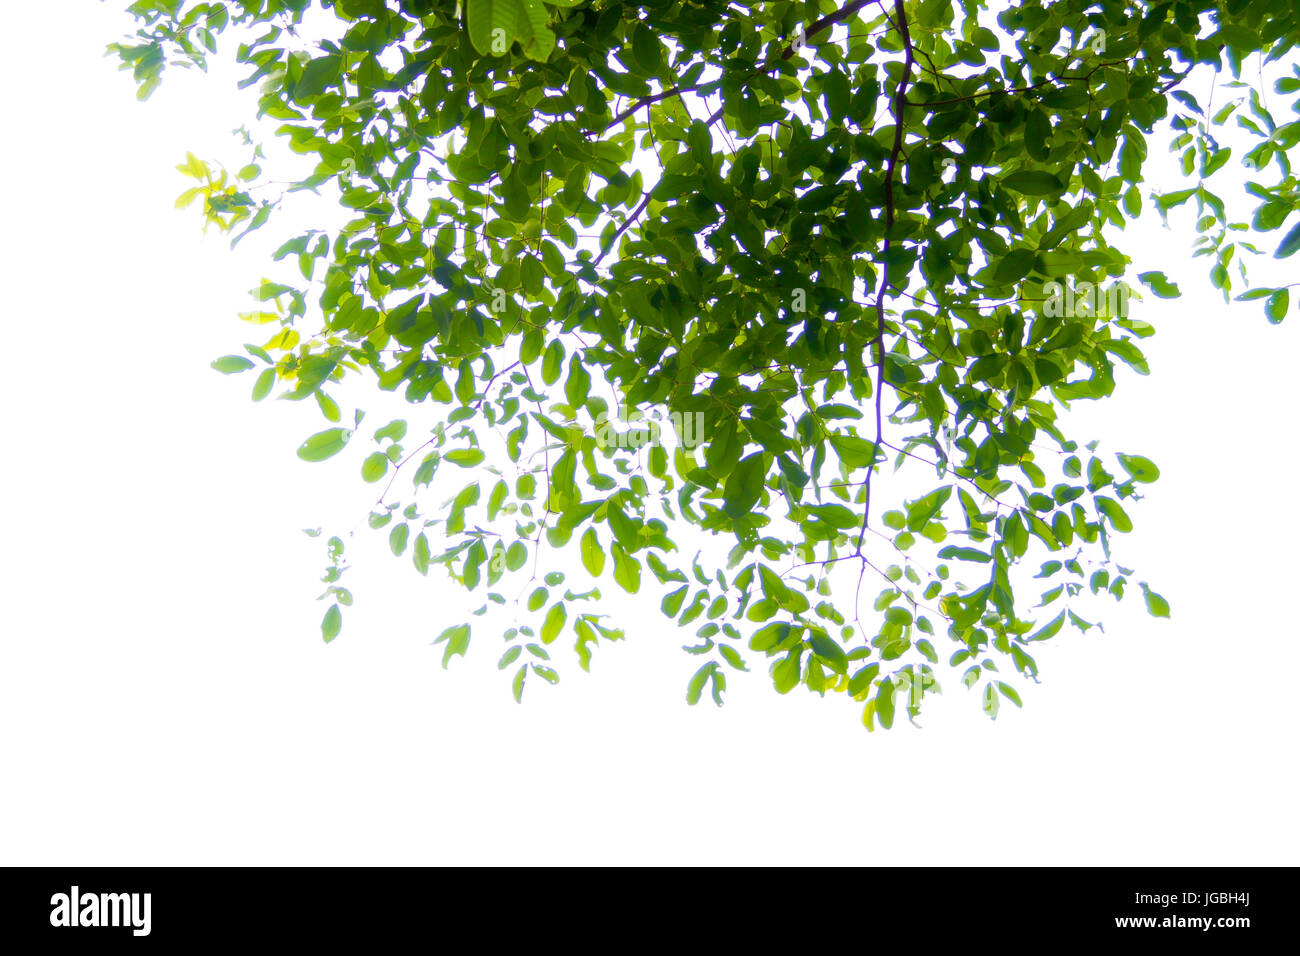 Branches and leaves on a white background. Stock Photo